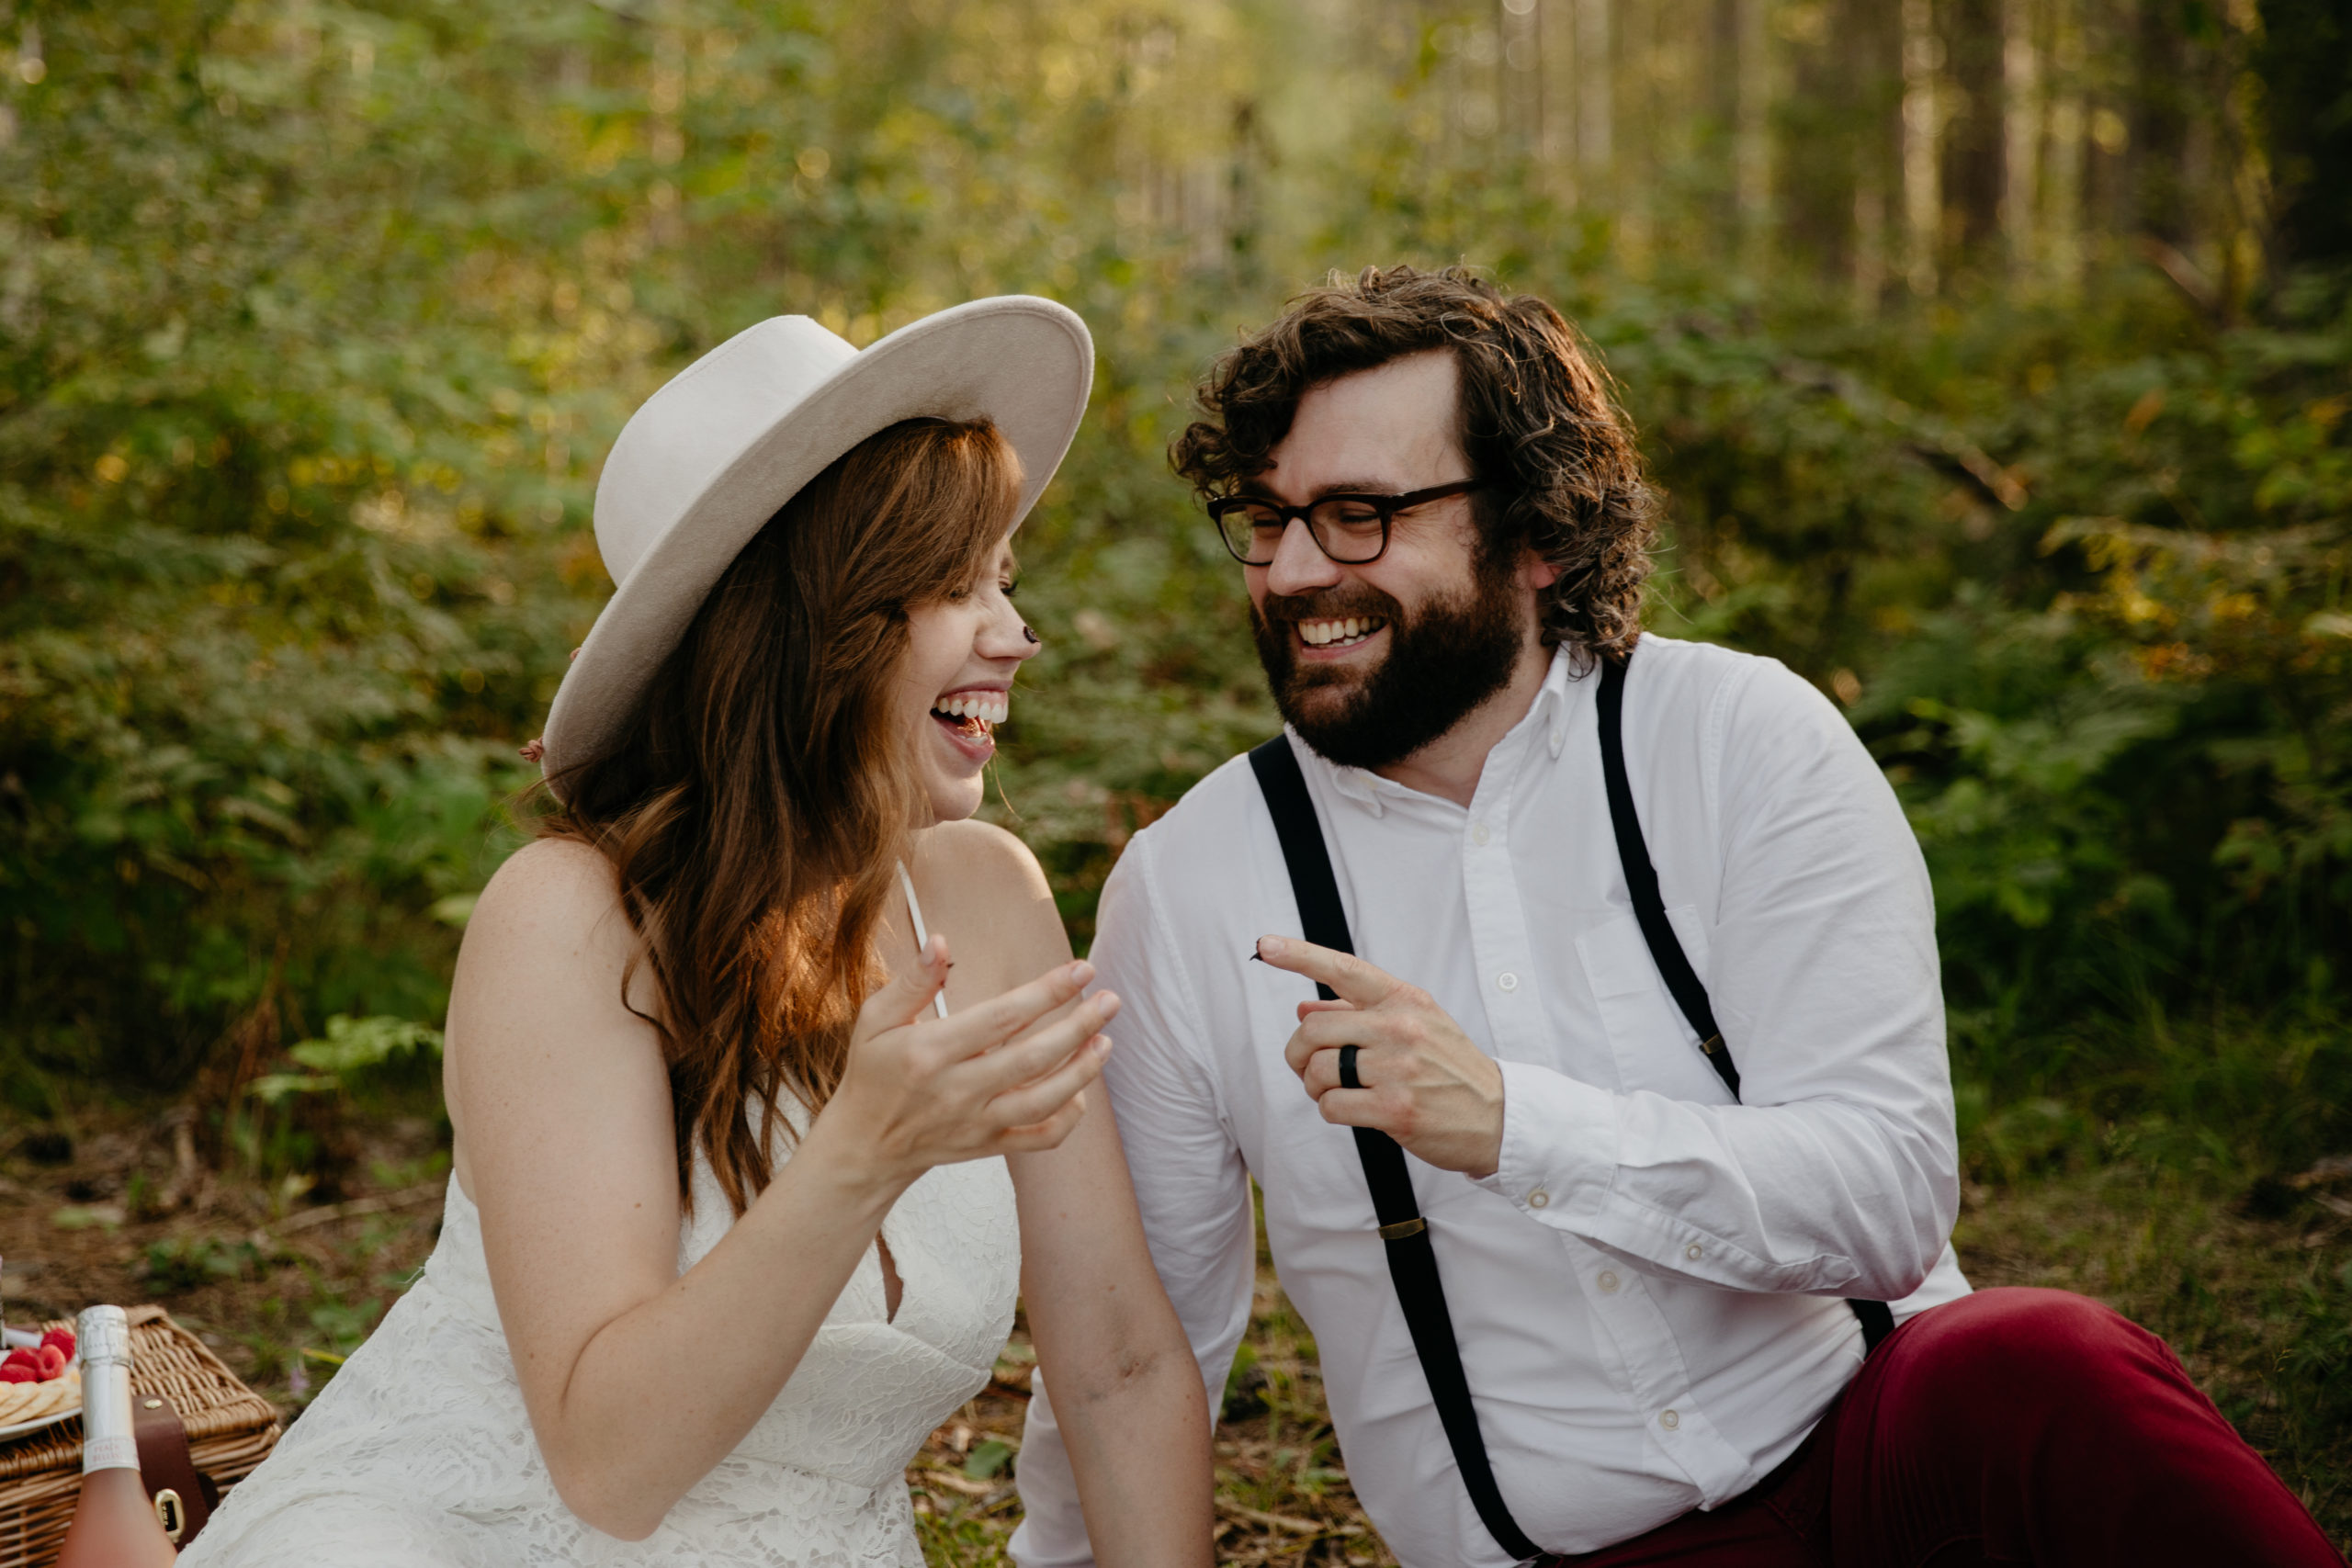 Elopements vs. Weddings: The Six Major Differences